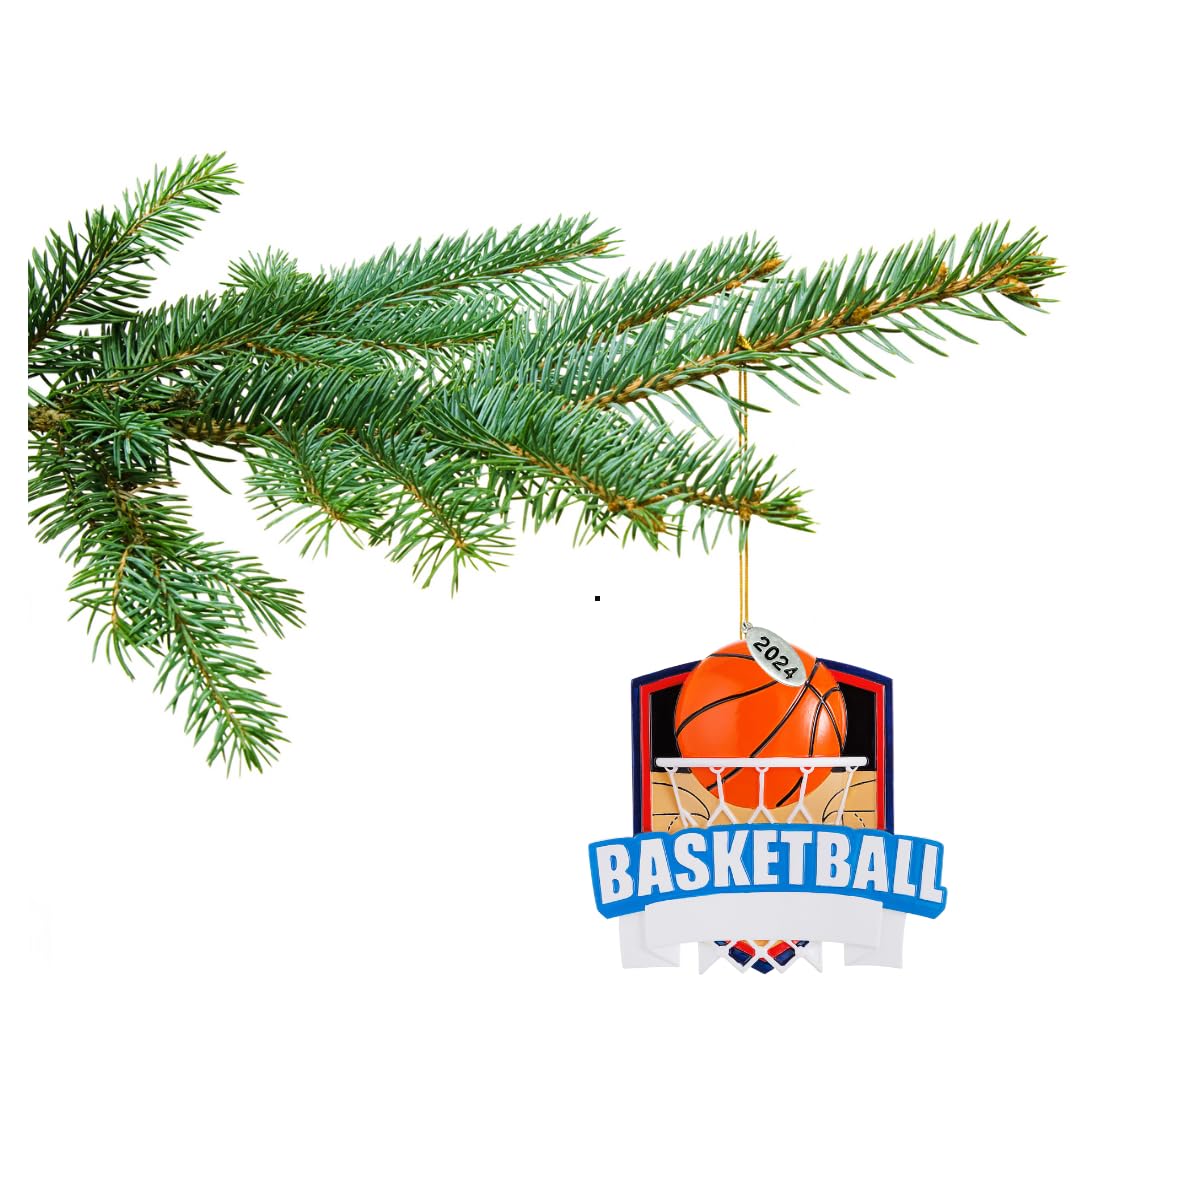 Basketball Ornaments, 2024 Basketball Ornament to Personalize, Basketball Gift Idea, Basketball Christmas Tree Ornaments for Boys or Girls, Includes Hangtag and Gift Box